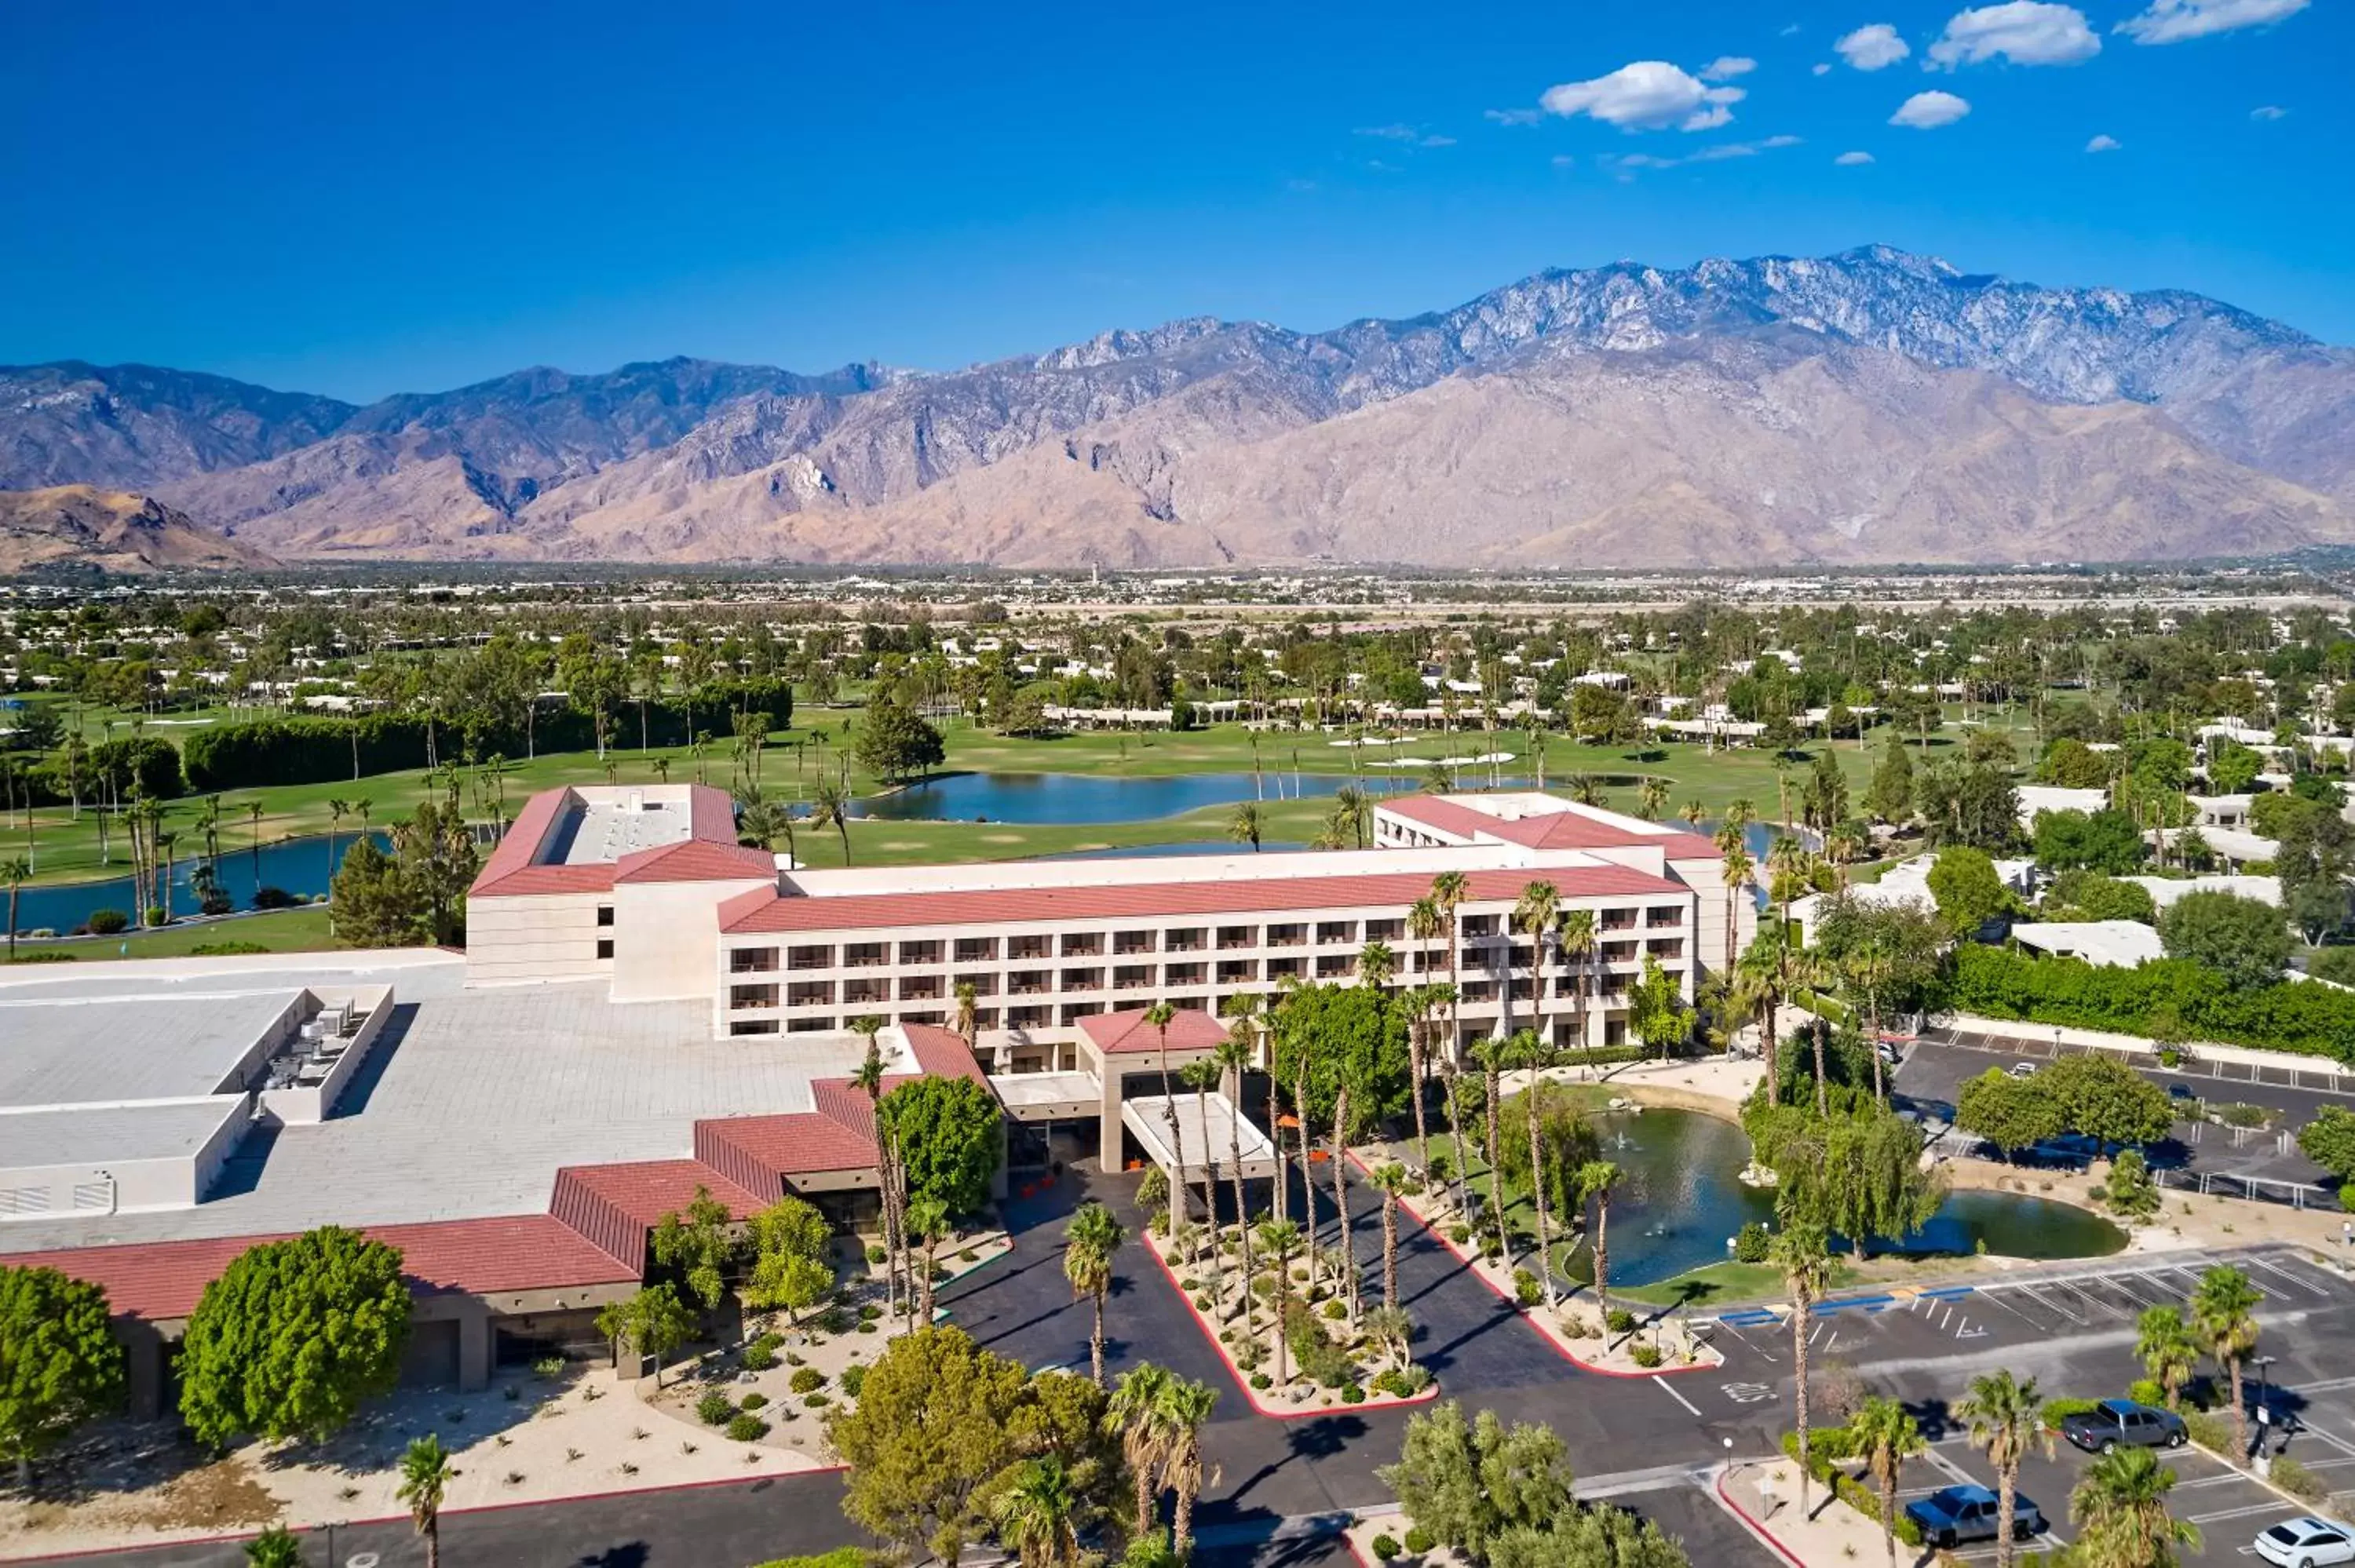 Property building, Bird's-eye View in DoubleTree by Hilton Golf Resort Palm Springs